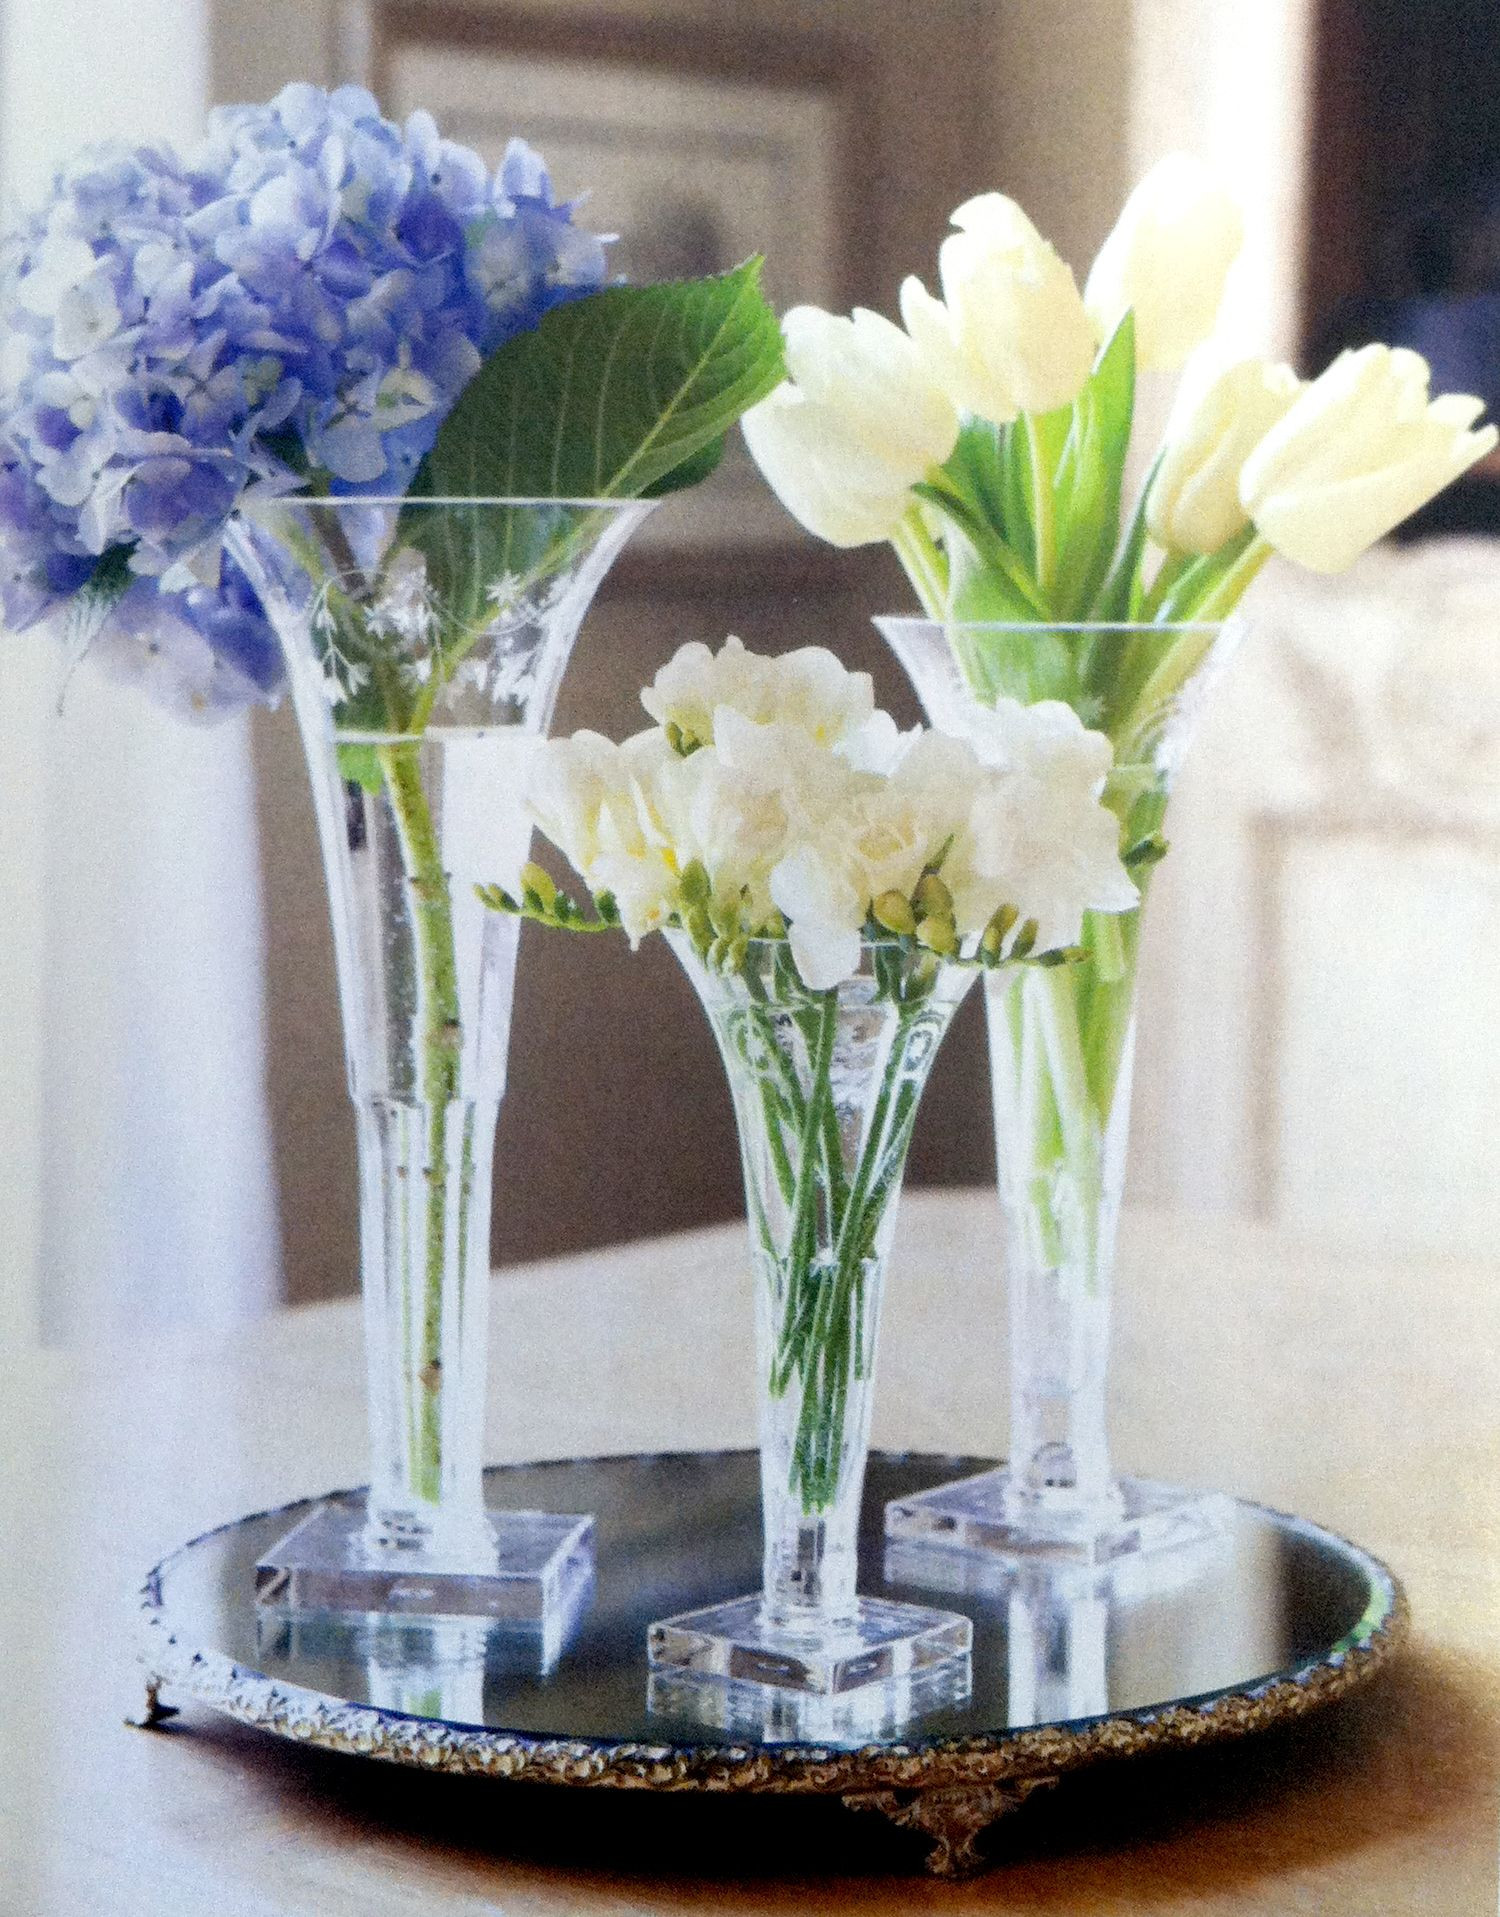 21 Spectacular William Yeoward Crystal Vase 2024 free download william yeoward crystal vase of dendrobium silk orchid spray in cream 35 5 with regard to victoria magazine blue and white issue from may june 2009 william yeoward crystal vases